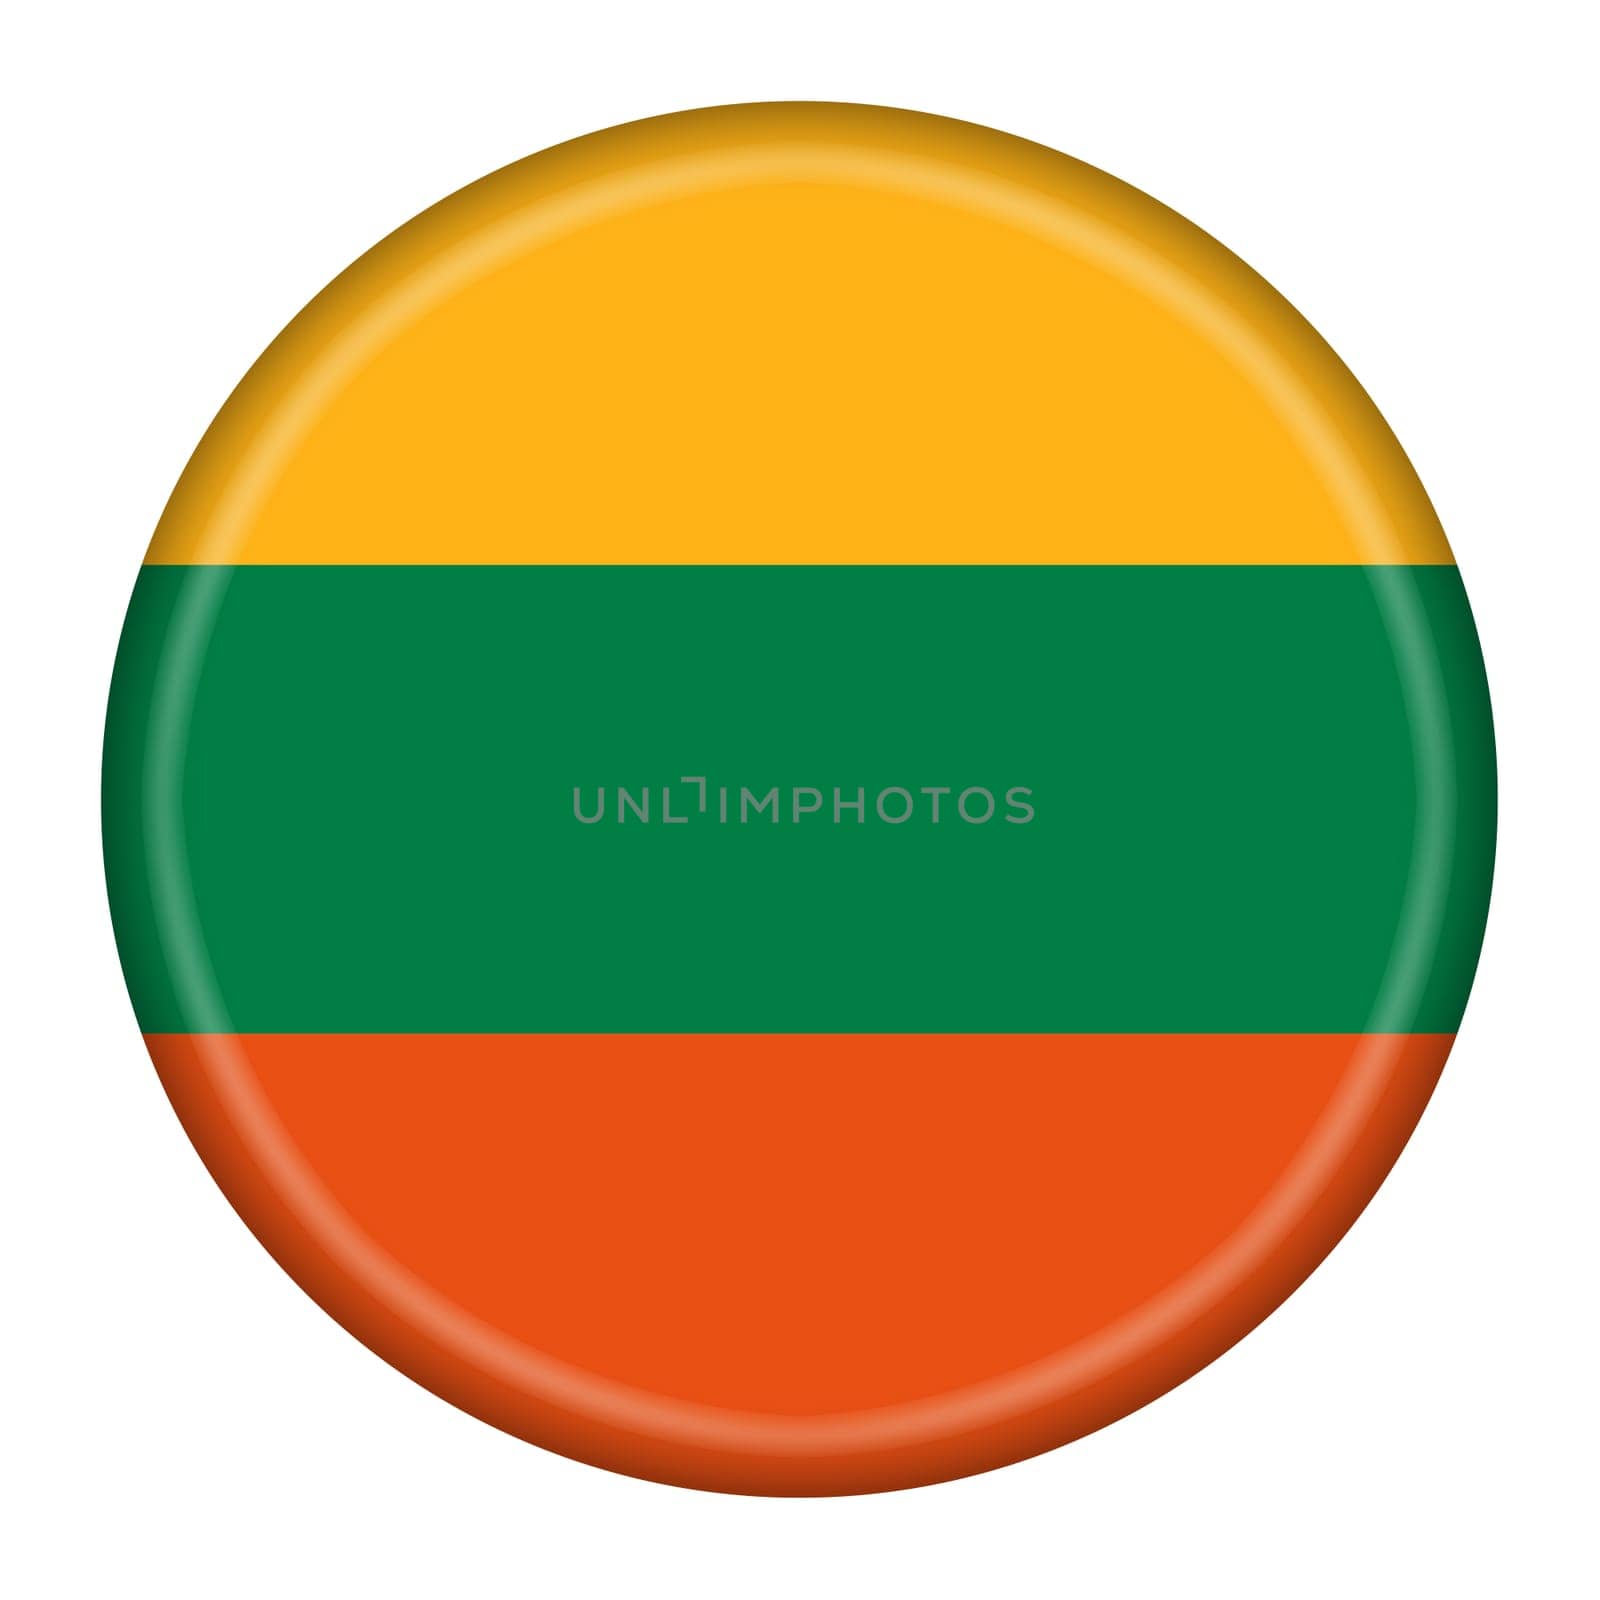 A Lithuania flag button 3d illustration with clipping path